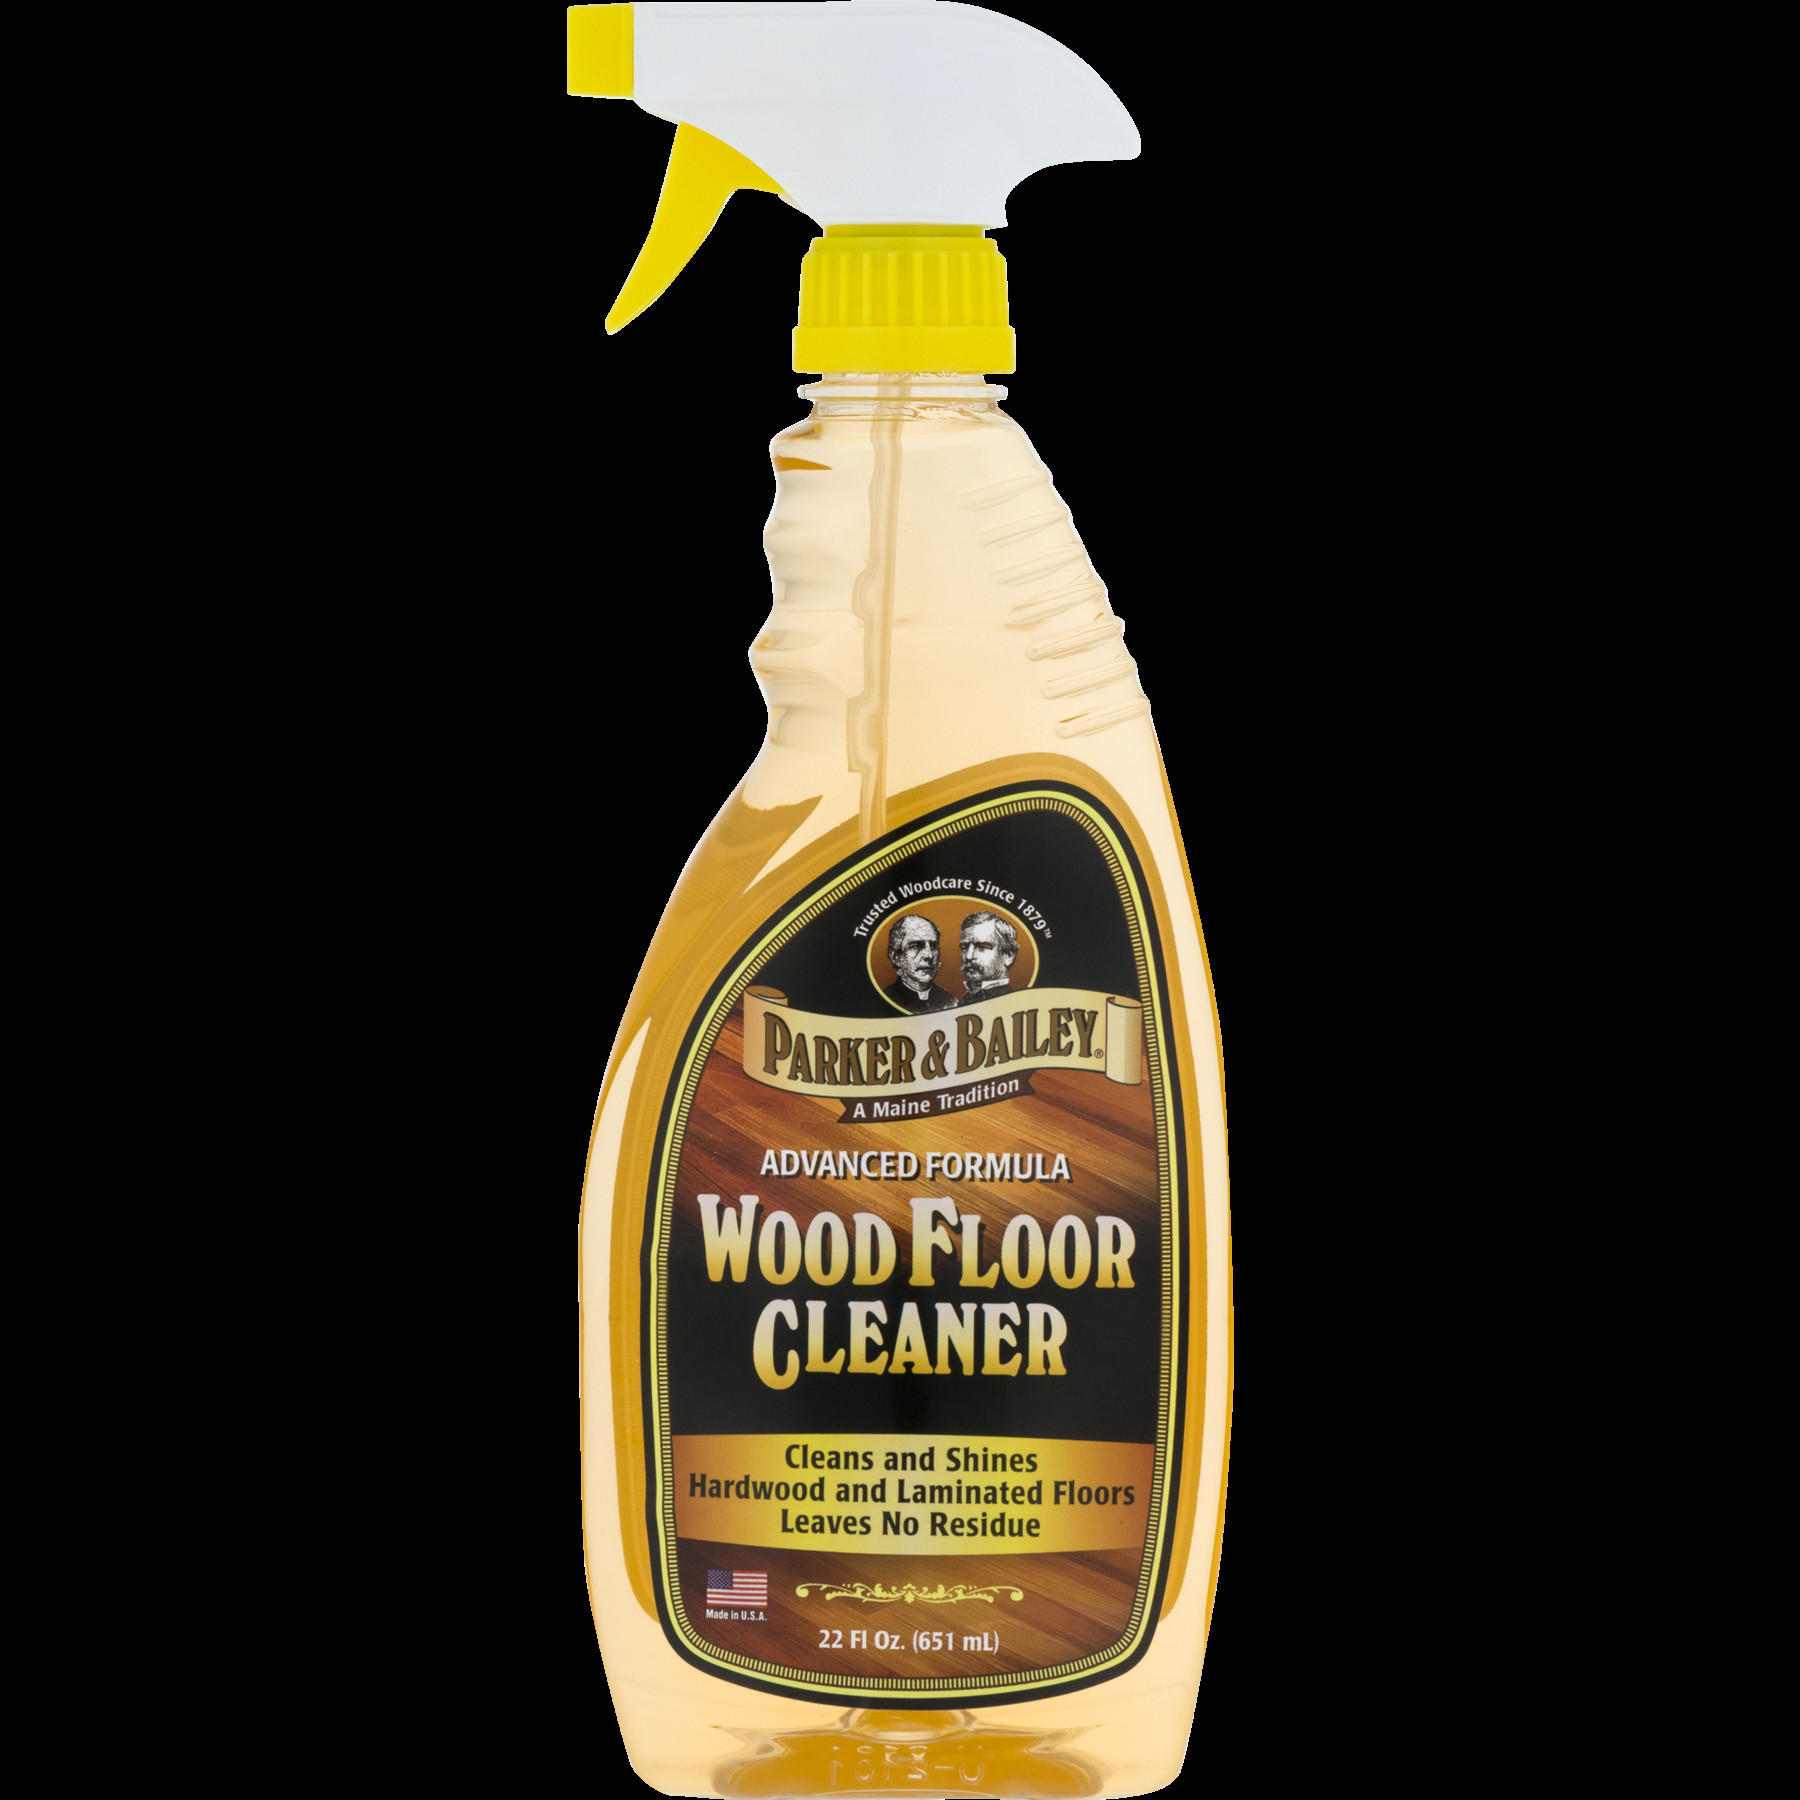 23 Popular Hardwood Floor Cleaner that Doesn T Leave Residue 2024 free download hardwood floor cleaner that doesn t leave residue of parker bailey wood floor cleaner 22 oz spray bottle walmart com with 3f095acb 0808 48a2 a430 d1543098b16a 1 8b7e9e3a9773456ebfb7590d6858c